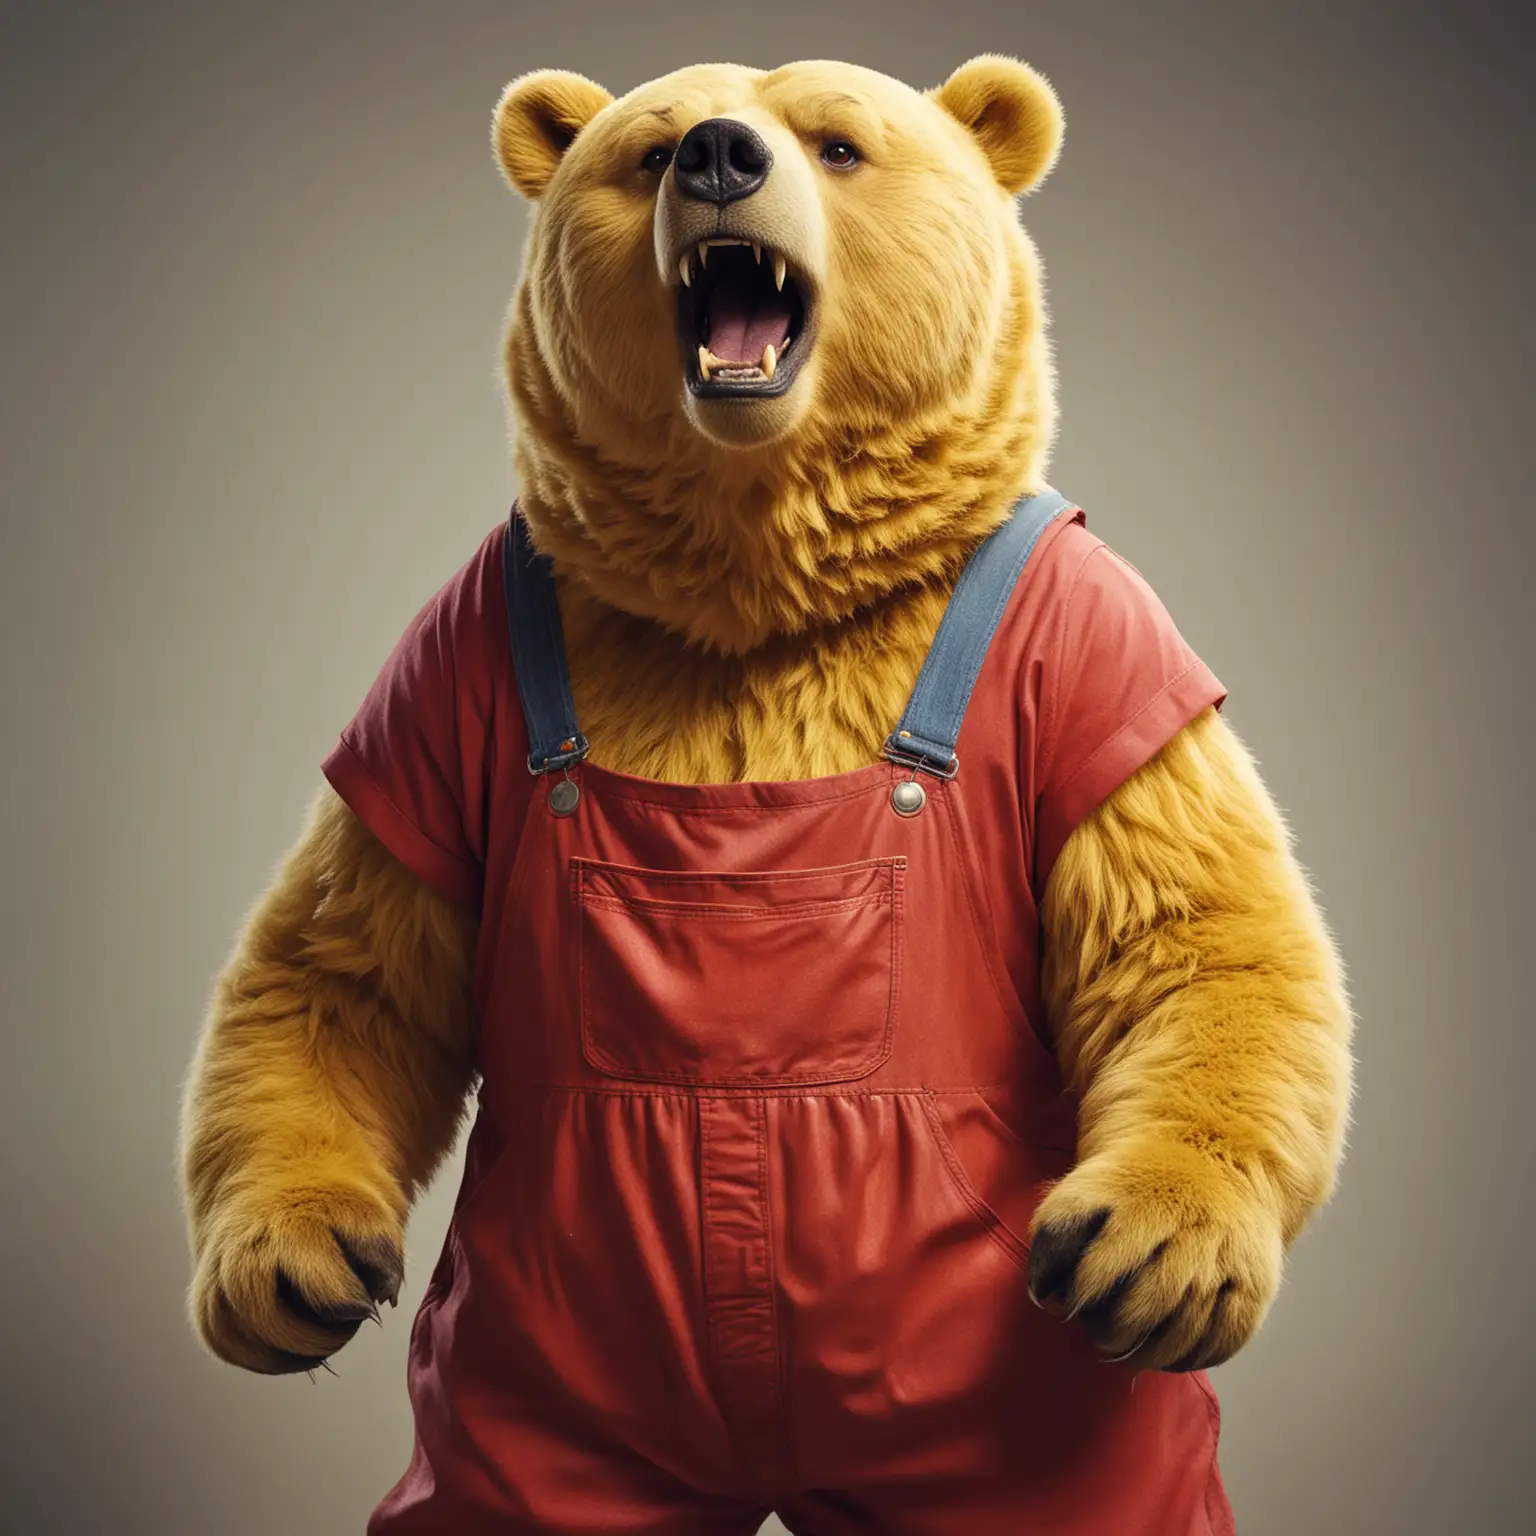 a yellow bear, mighty, giant, red bib overalls, mid age, angry, powerful 